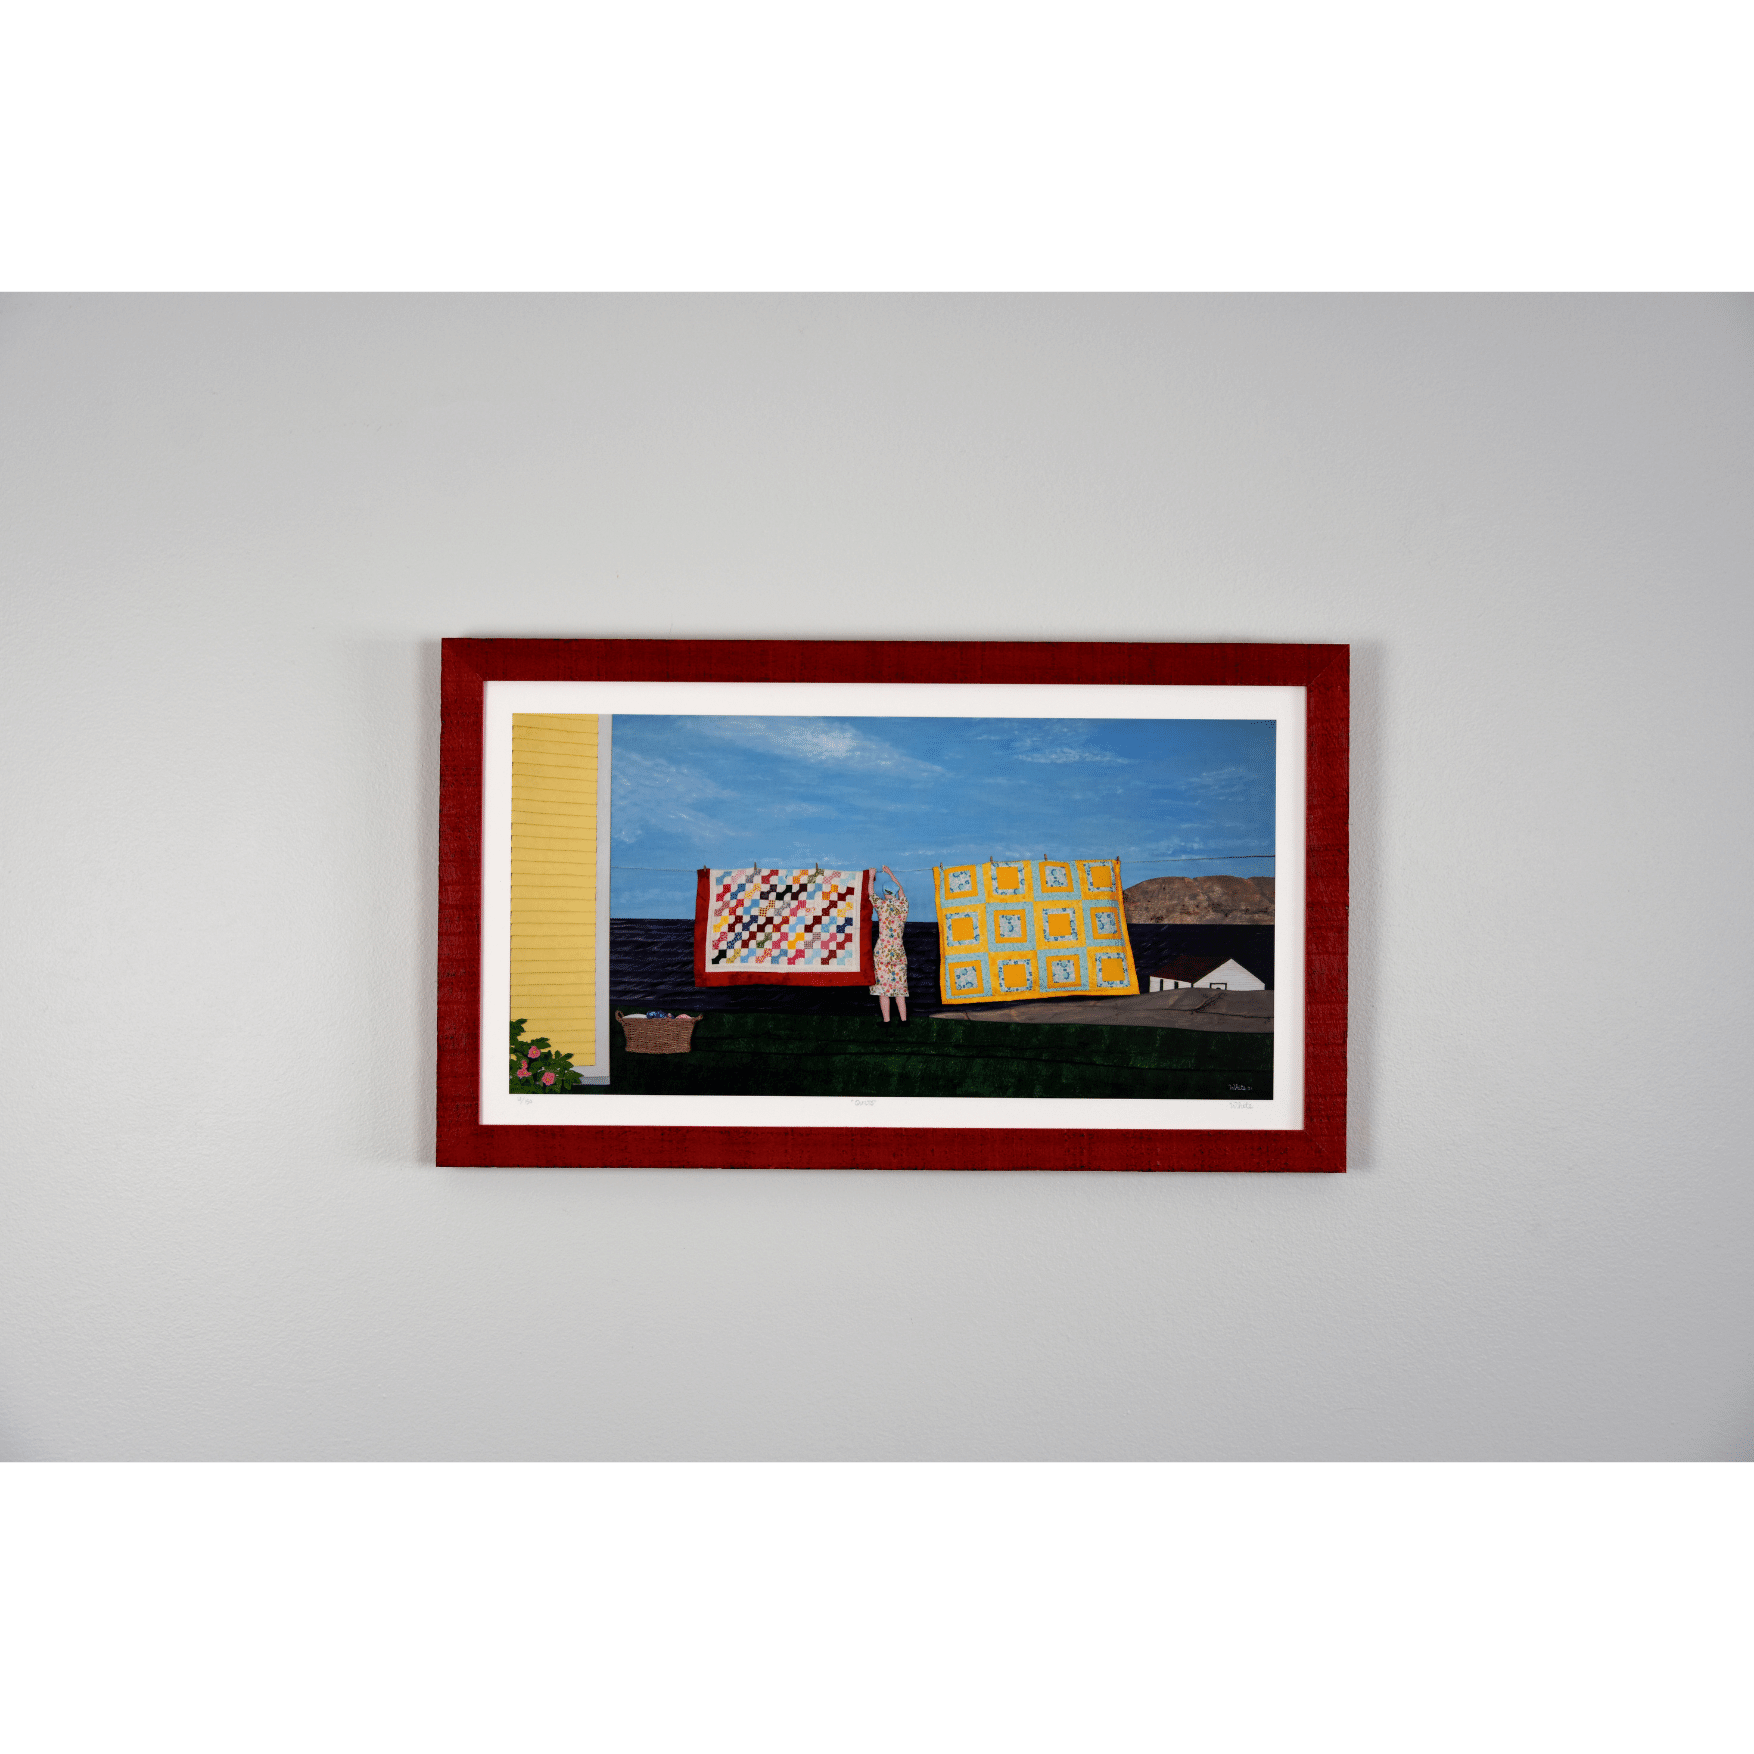 "Quilts" print features a woman in a yellow dress hanging quilts with the ocean and Twillingate coast in the background.